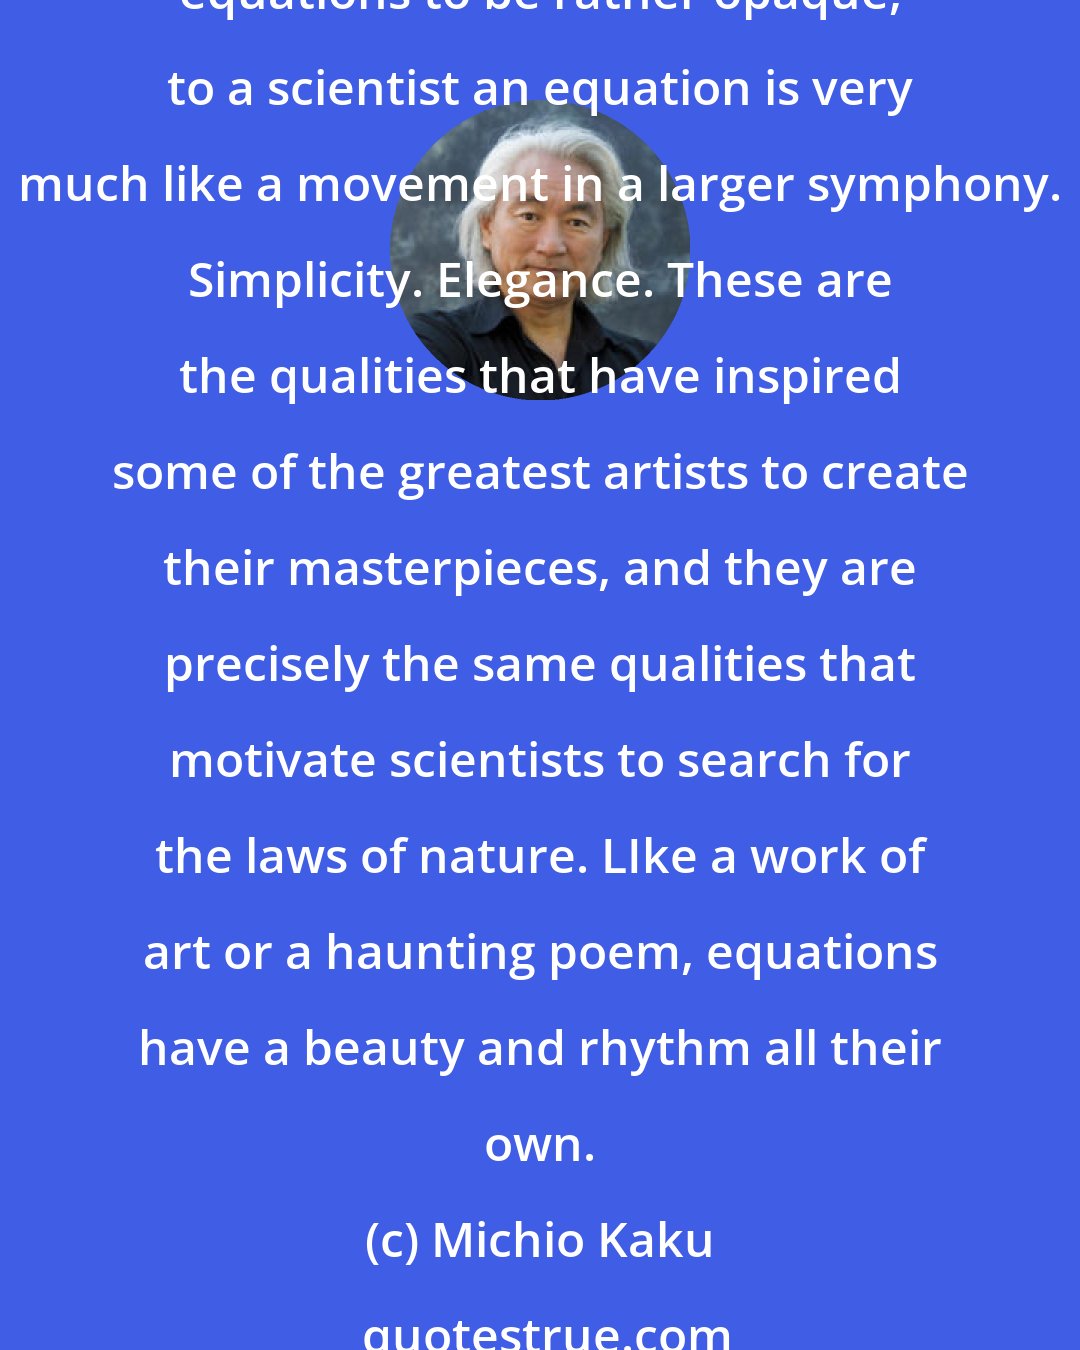 Michio Kaku: Like music or art, mathematical equations can have a natural progression and logic that can evoke rare passions in a scientist. Although the lay public considers mathematical equations to be rather opaque, to a scientist an equation is very much like a movement in a larger symphony. Simplicity. Elegance. These are the qualities that have inspired some of the greatest artists to create their masterpieces, and they are precisely the same qualities that motivate scientists to search for the laws of nature. LIke a work of art or a haunting poem, equations have a beauty and rhythm all their own.